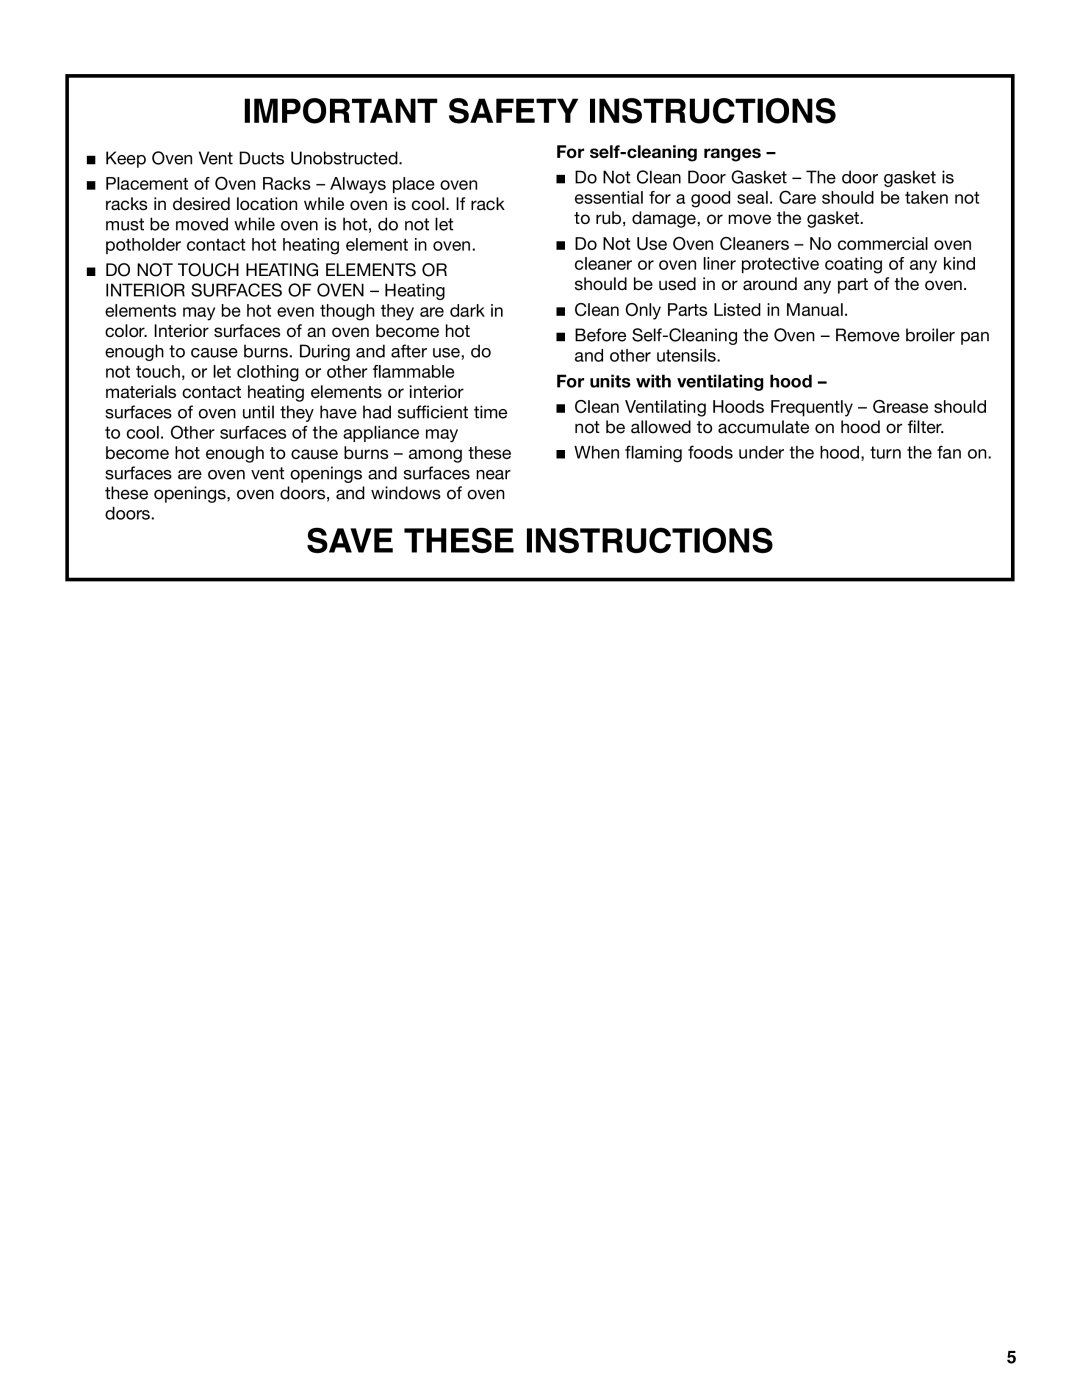 Whirlpool 9754384 manual For self-cleaning ranges, For units with ventilating hood, Important Safety Instructions 